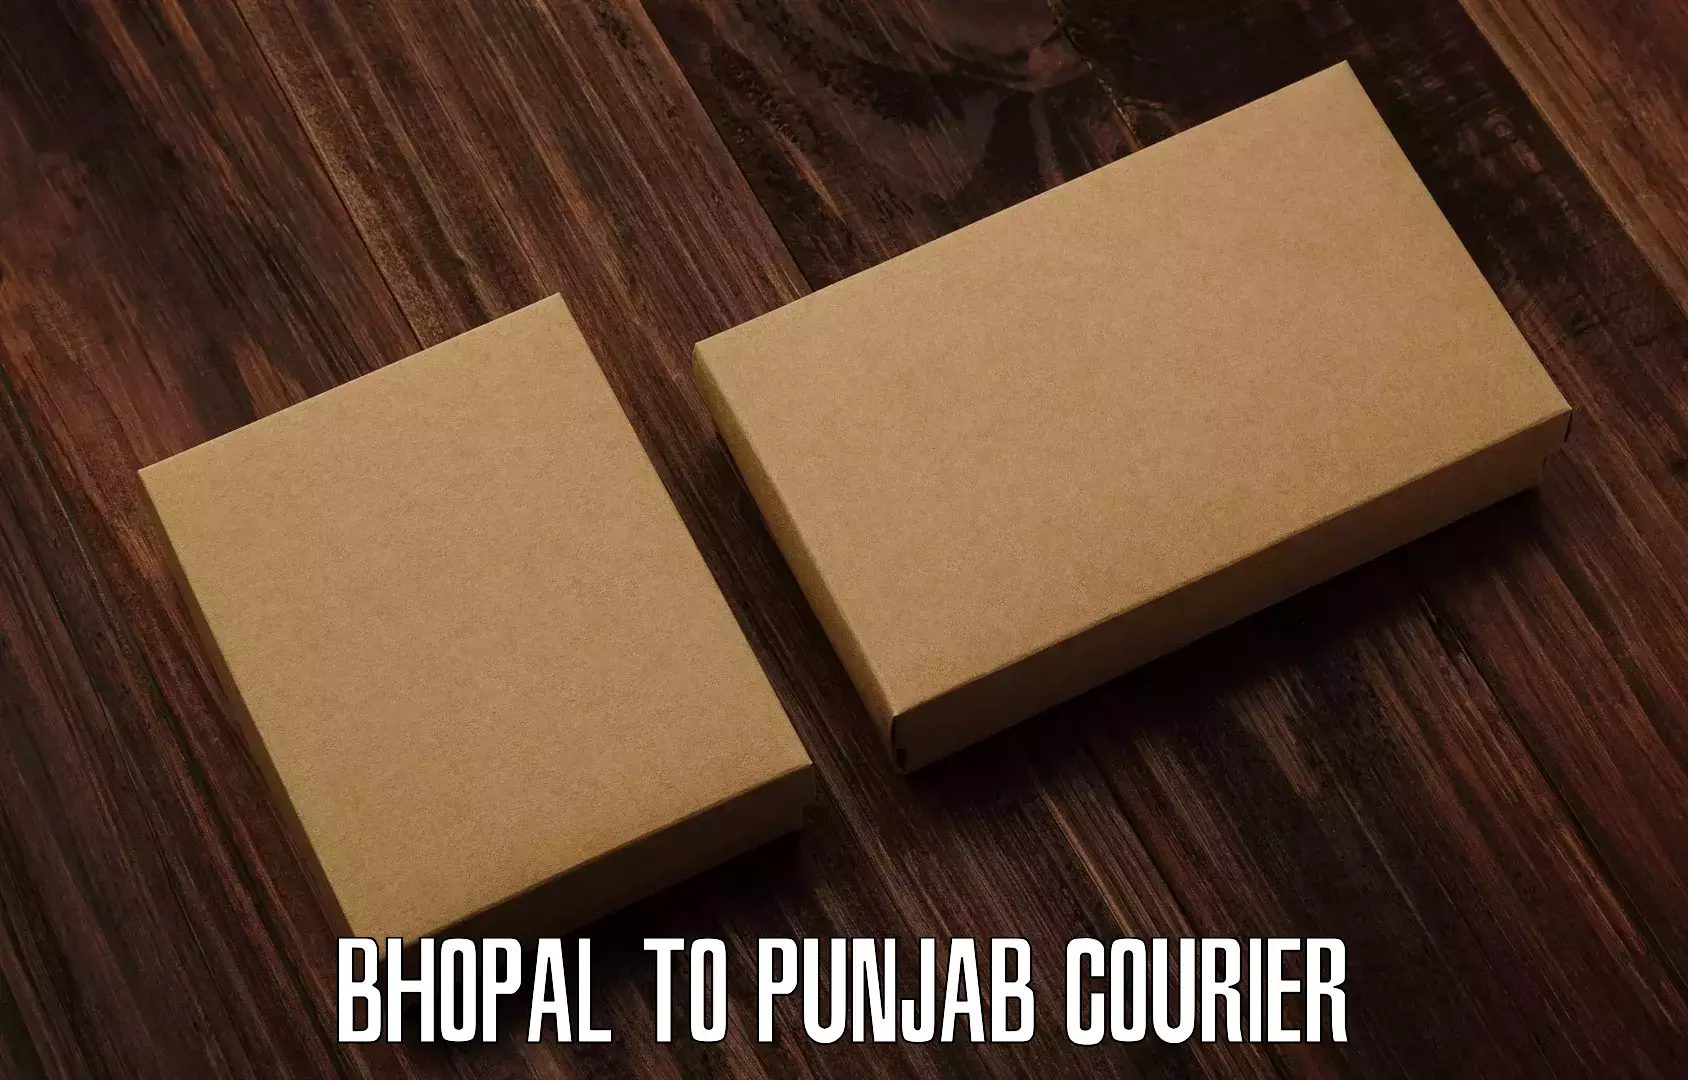 24-hour courier service Bhopal to Mohali